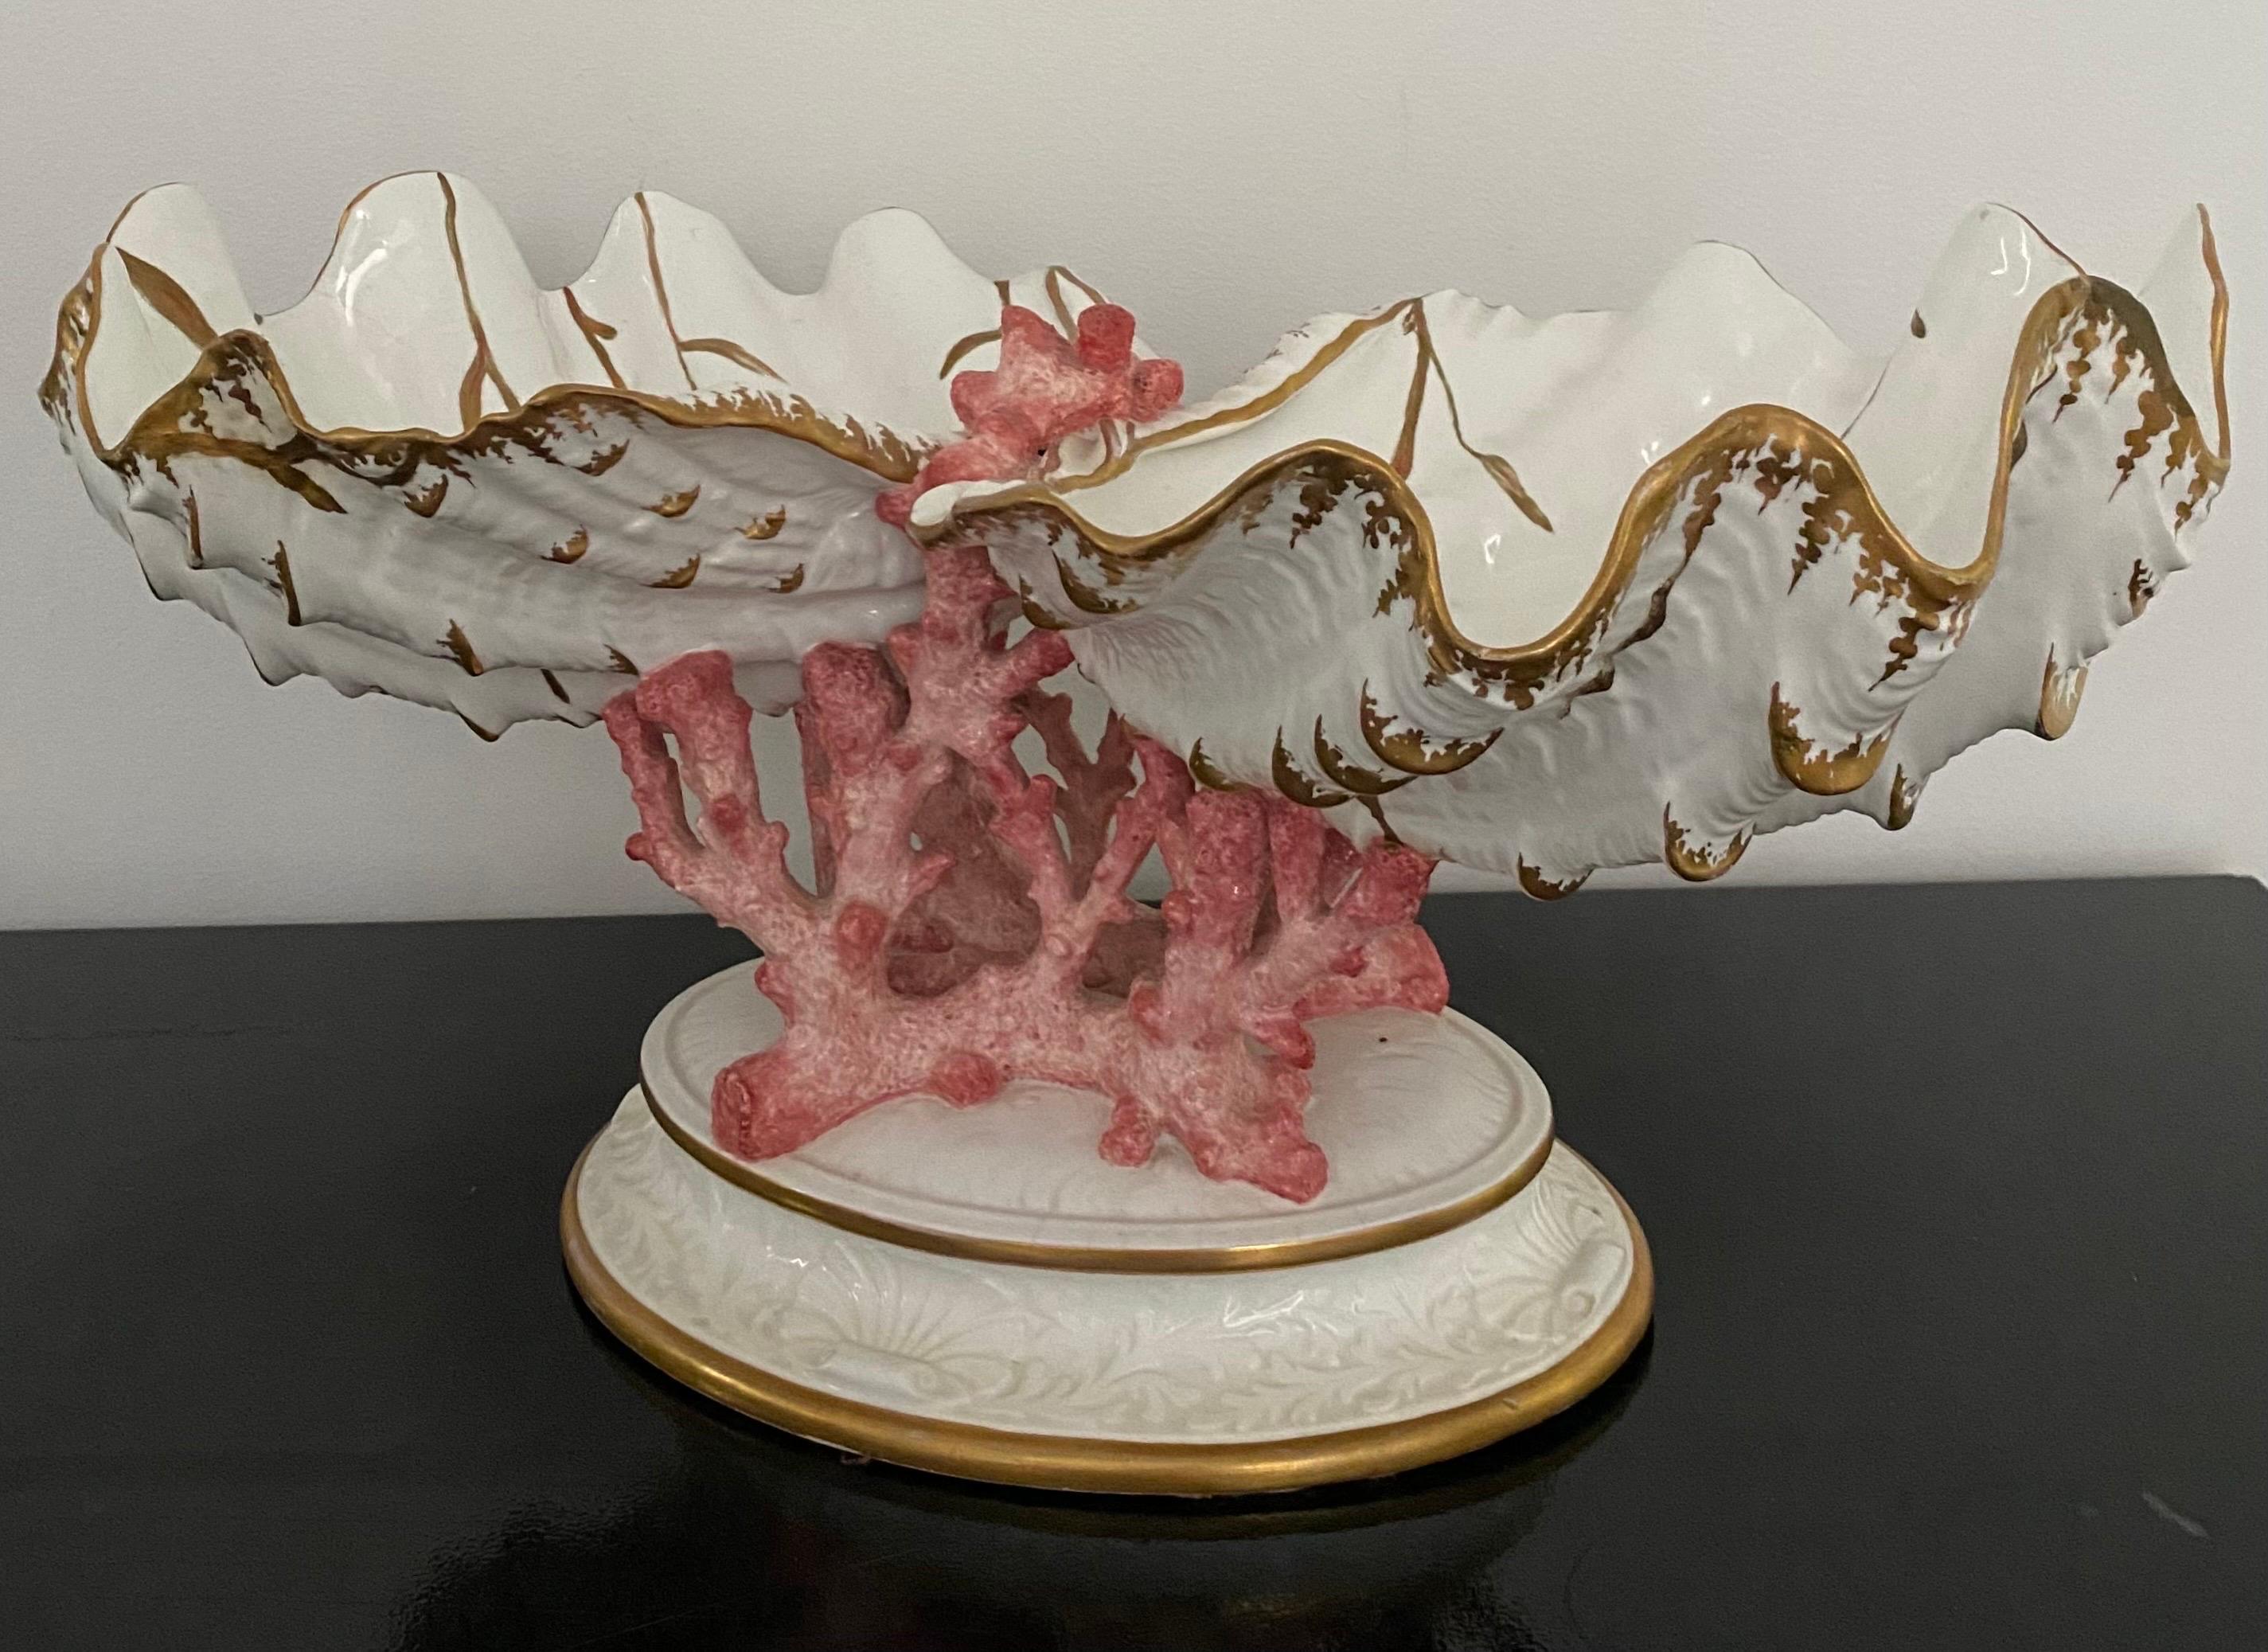 Spectacular Hollywood Regency Wedgwood bone China coral and shell centerpiece, England, early 20th century. Two large hand painted gilt decorated clam shells rest atop sculptural red coral mounted on a stepped oval base. 

This unique majolica